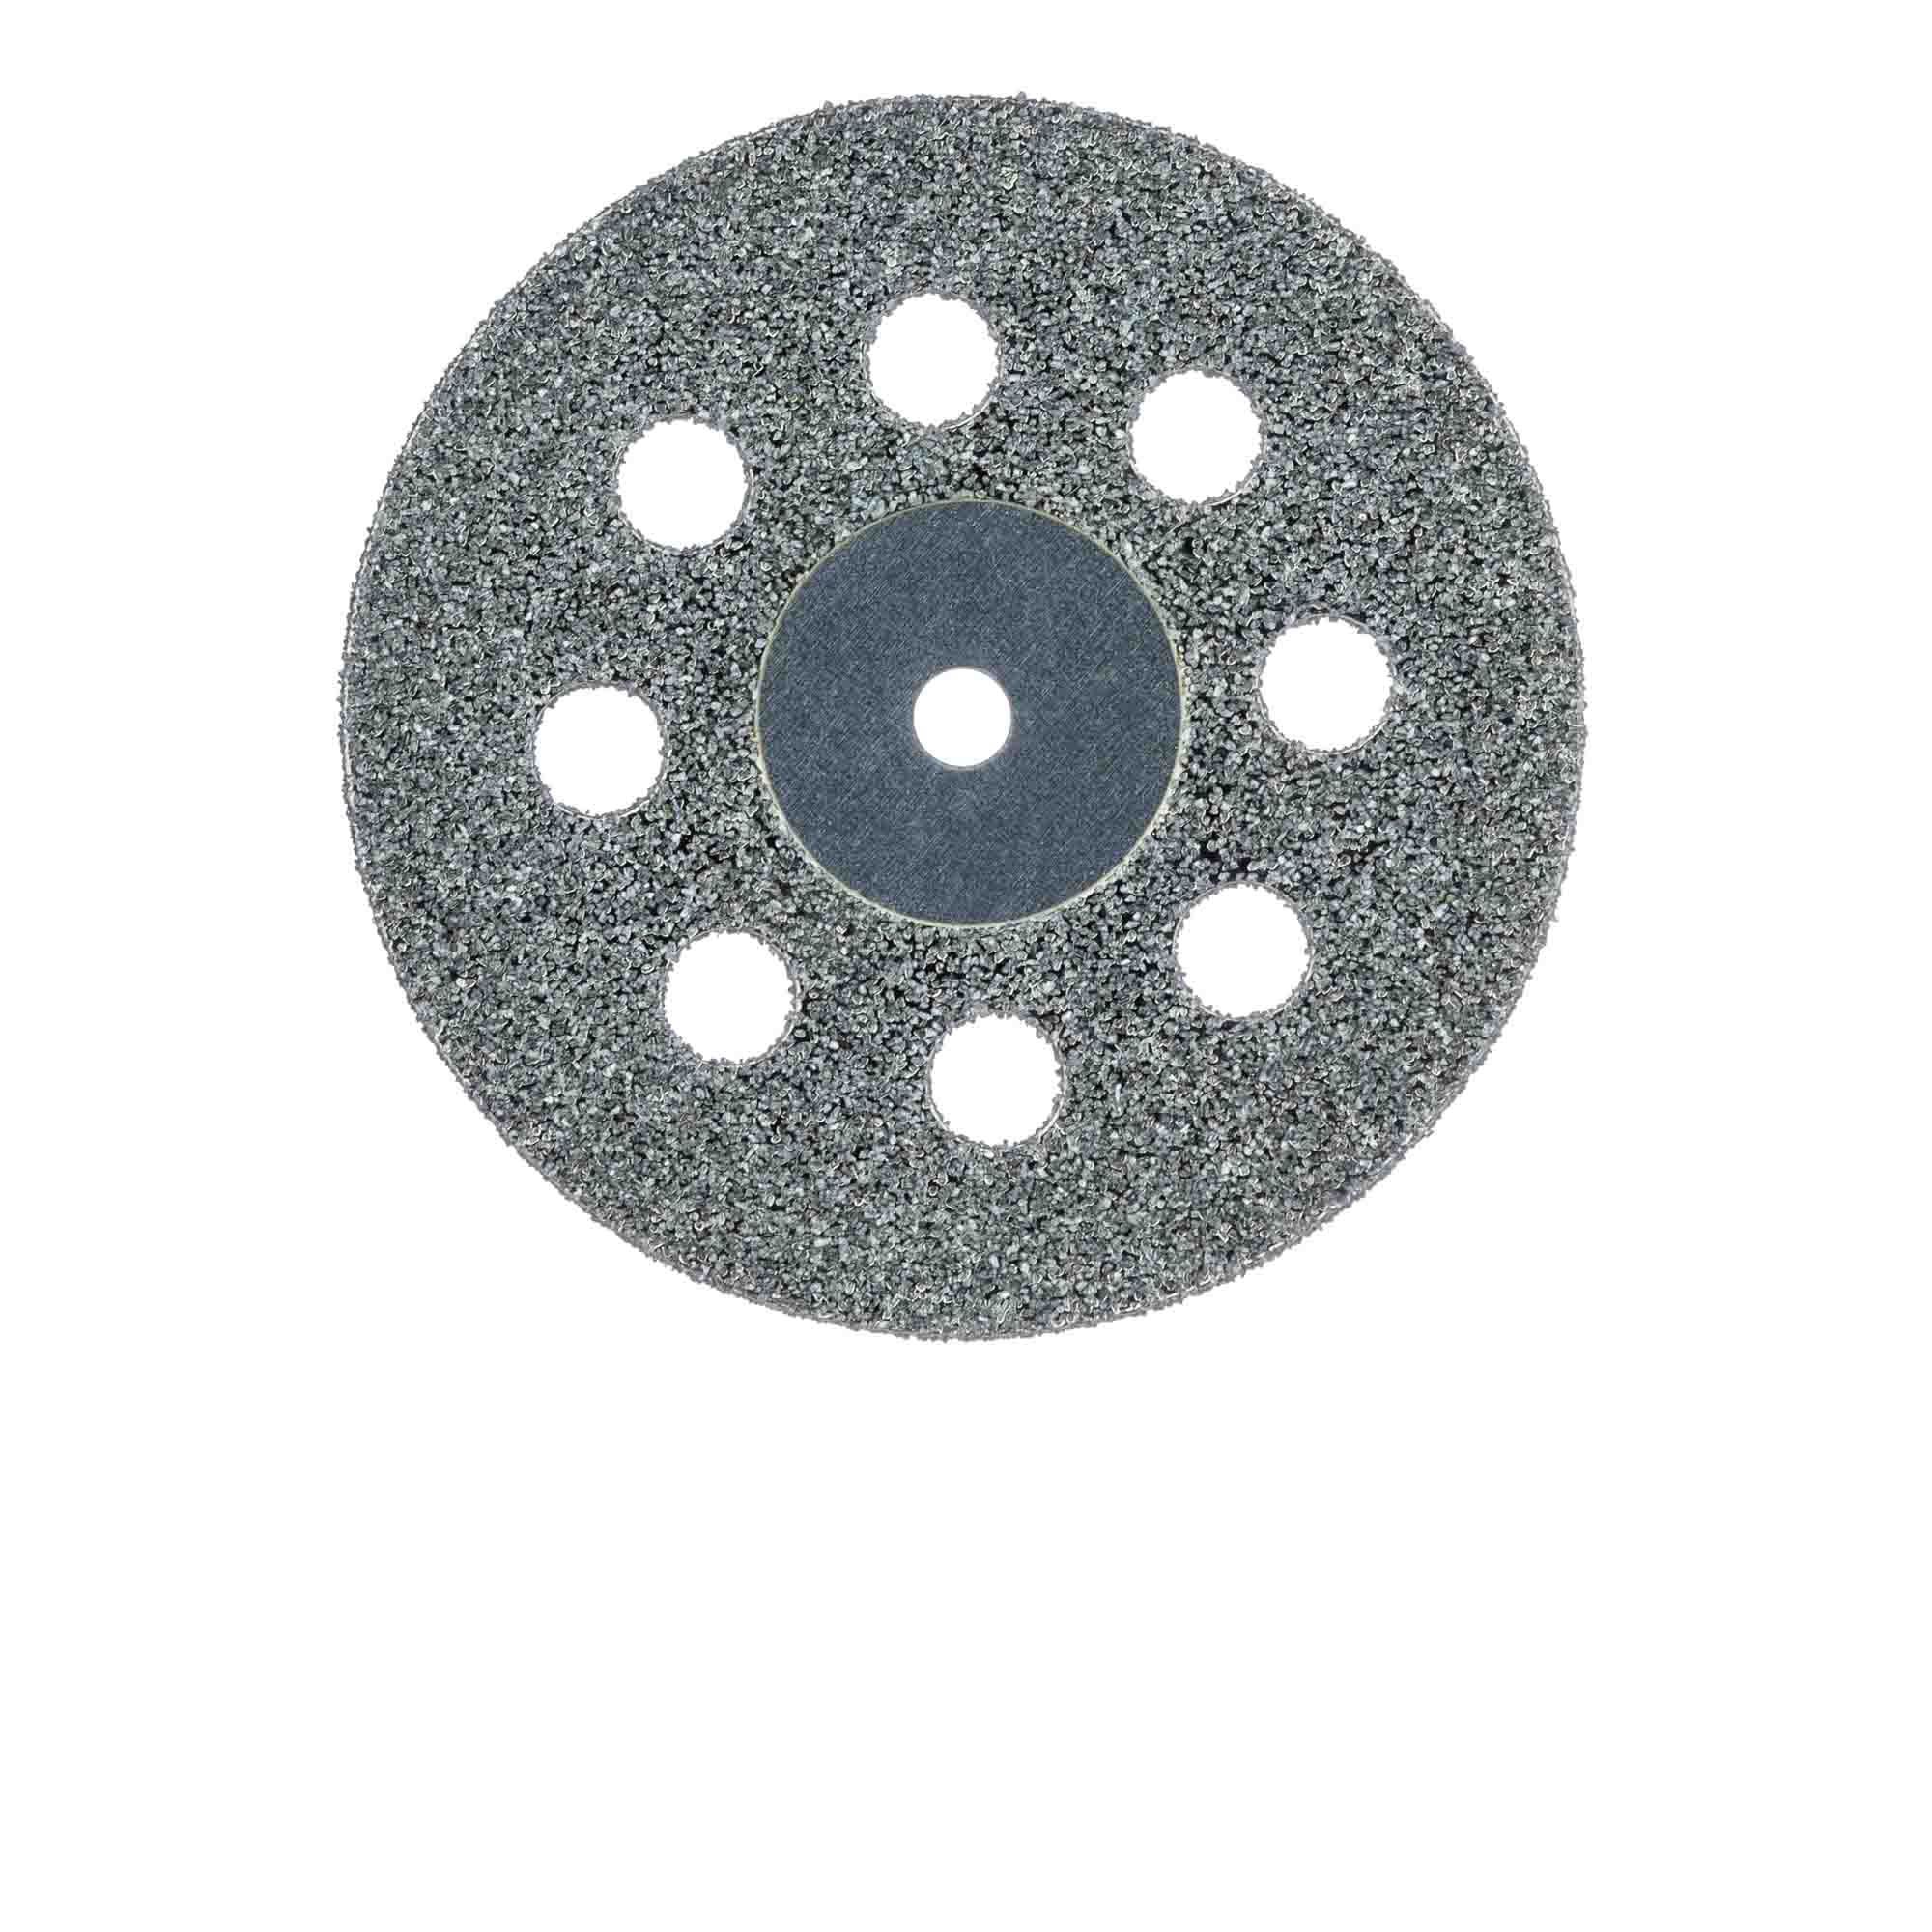 918D-220-UNM Diamond Bur, Perforated Disc, Double Sided, 0.5mm Thick, 22mm Ø, UNM